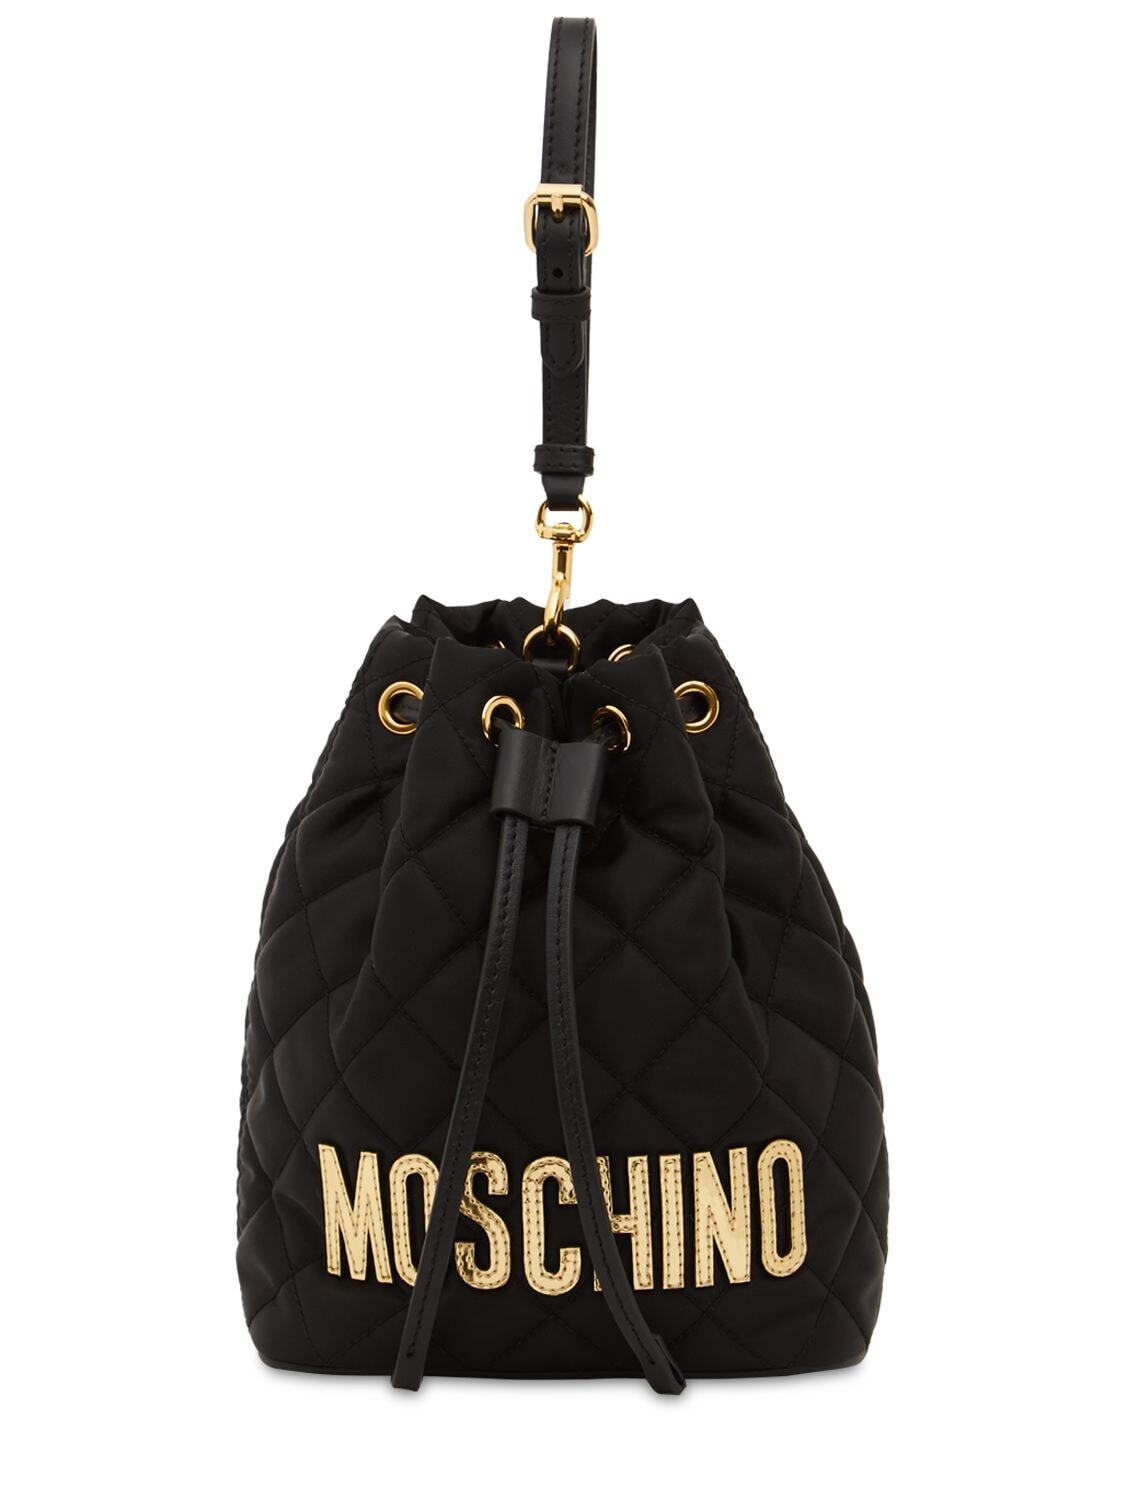 MOSCHINO Logo Quilted Top Handle Bag in black